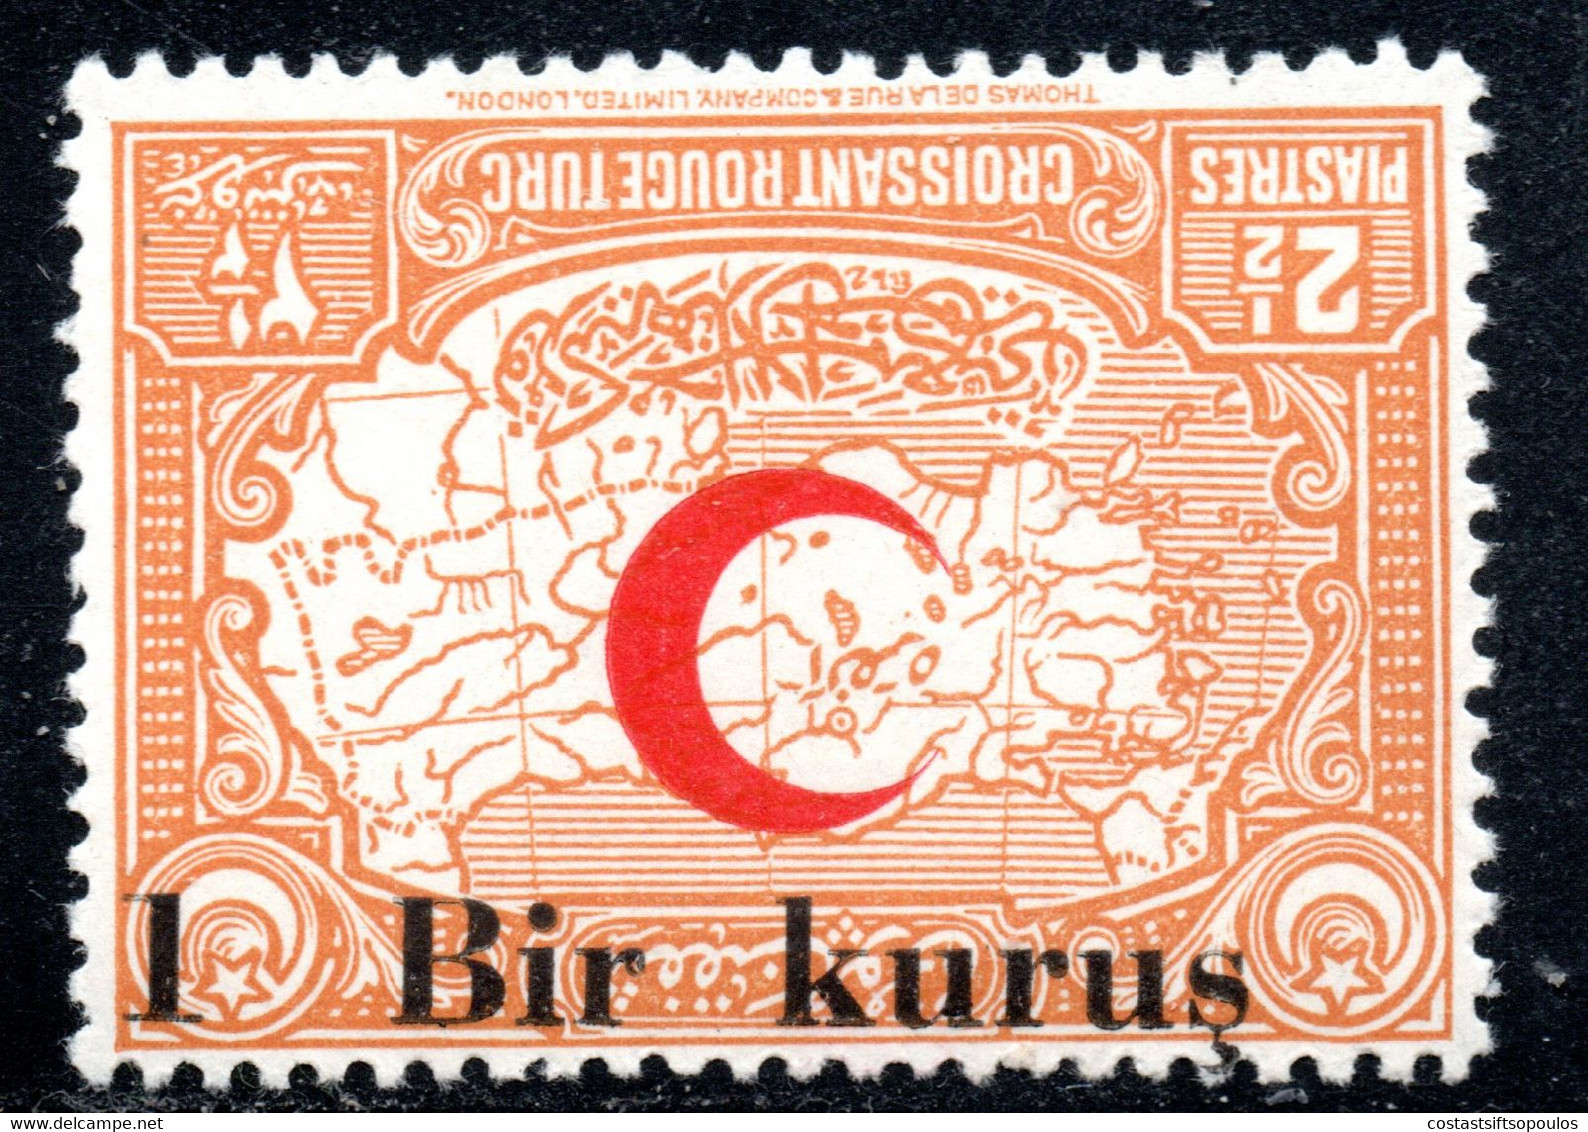 1011.TURKEY,1933-1934 RED CRESCENT,MAP MICH.24,SC.RA 21 INVERTED SURCHARGE,MNH,UNRECORDED - Unused Stamps